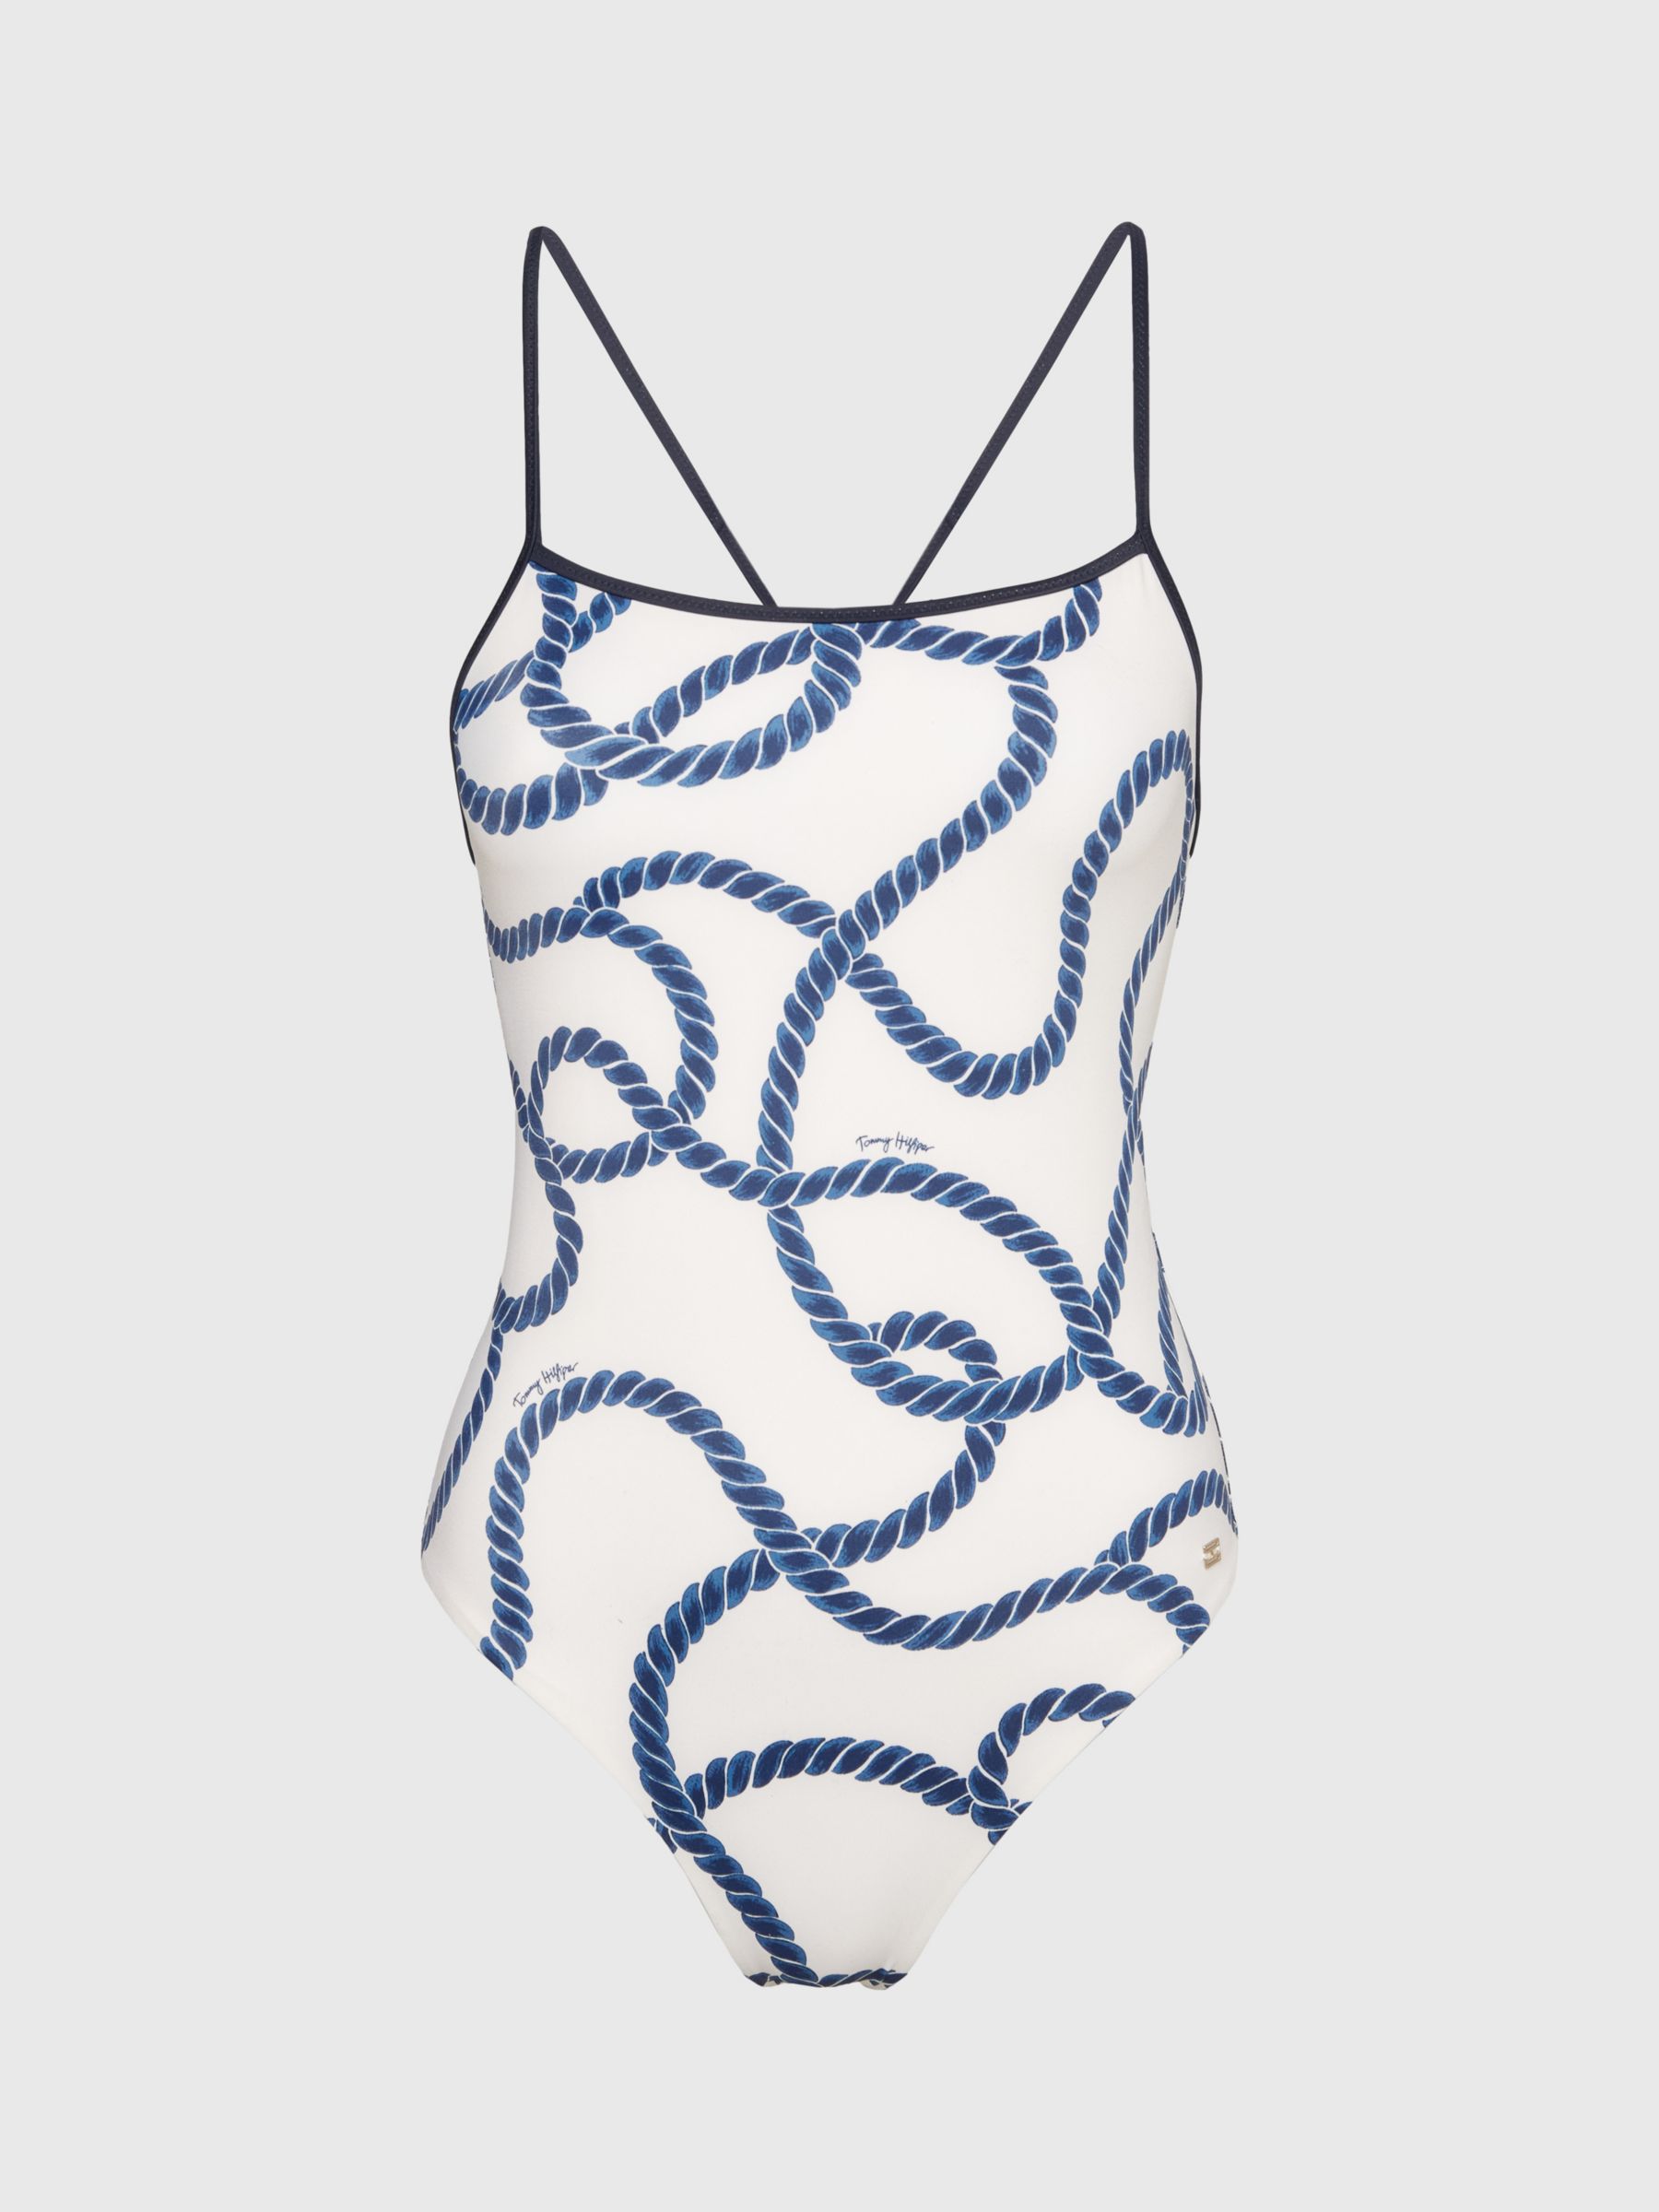 Tommy Hilfiger Rope Print Cross Back Swimsuit, White/Blue, XL